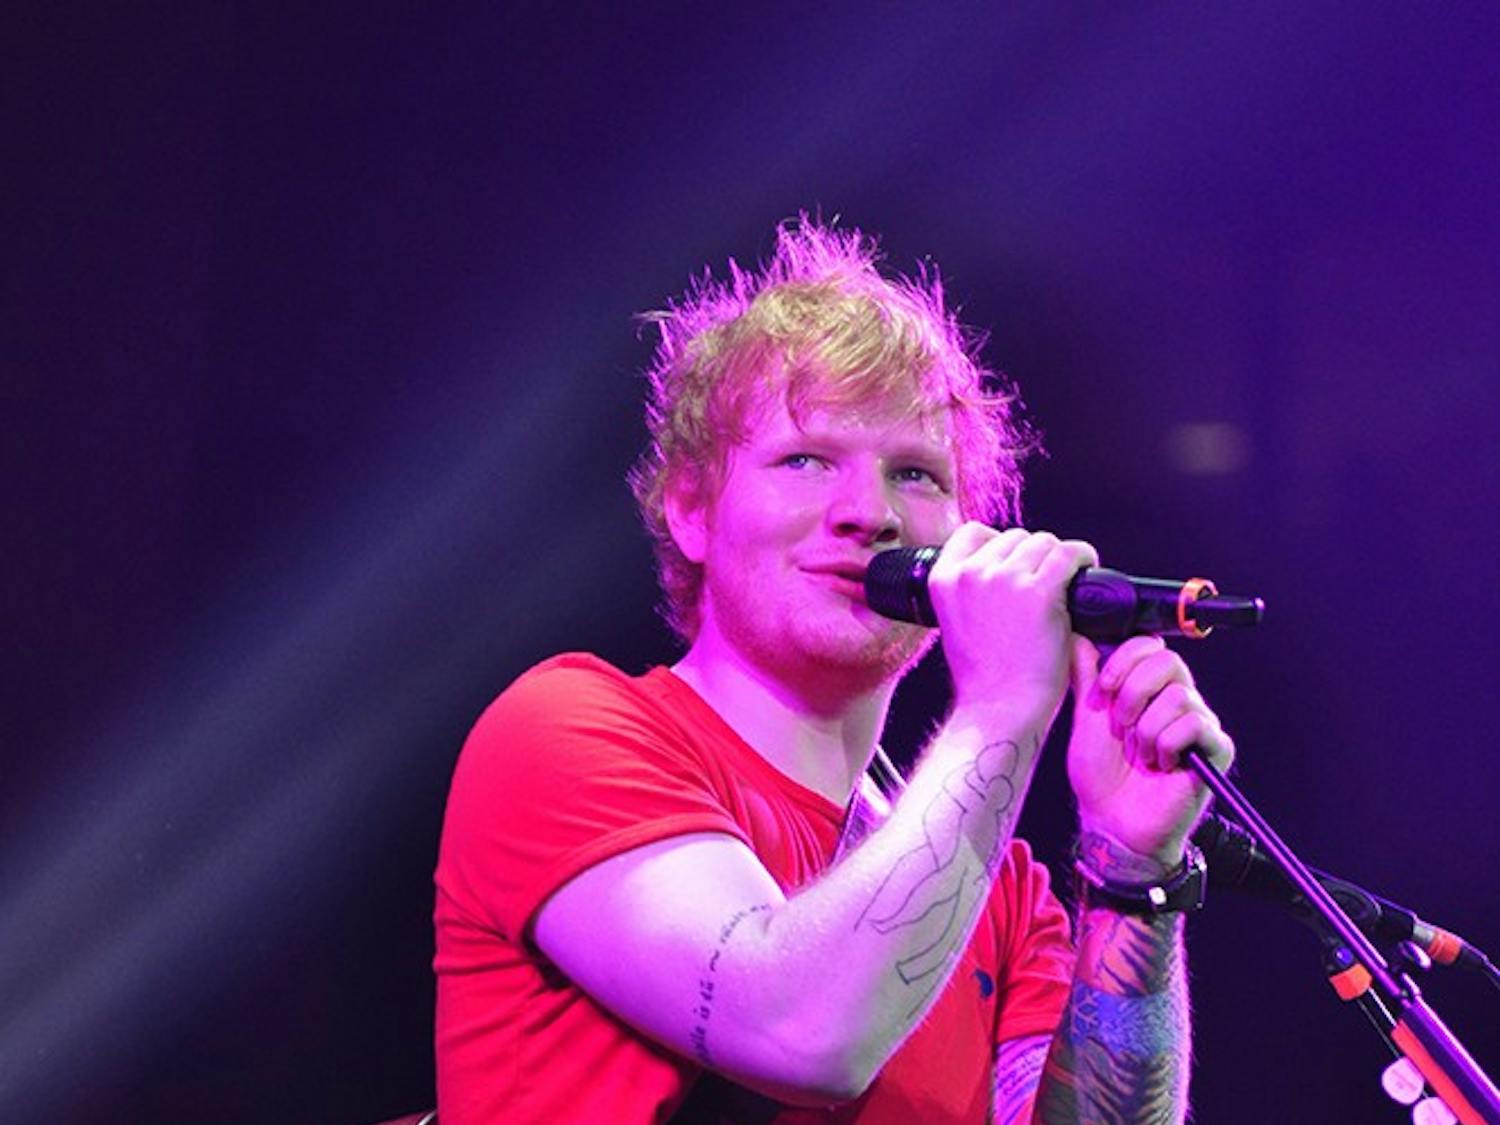 	Ed Sheeran opened the Saturday night show at the Colonial Life Arena.